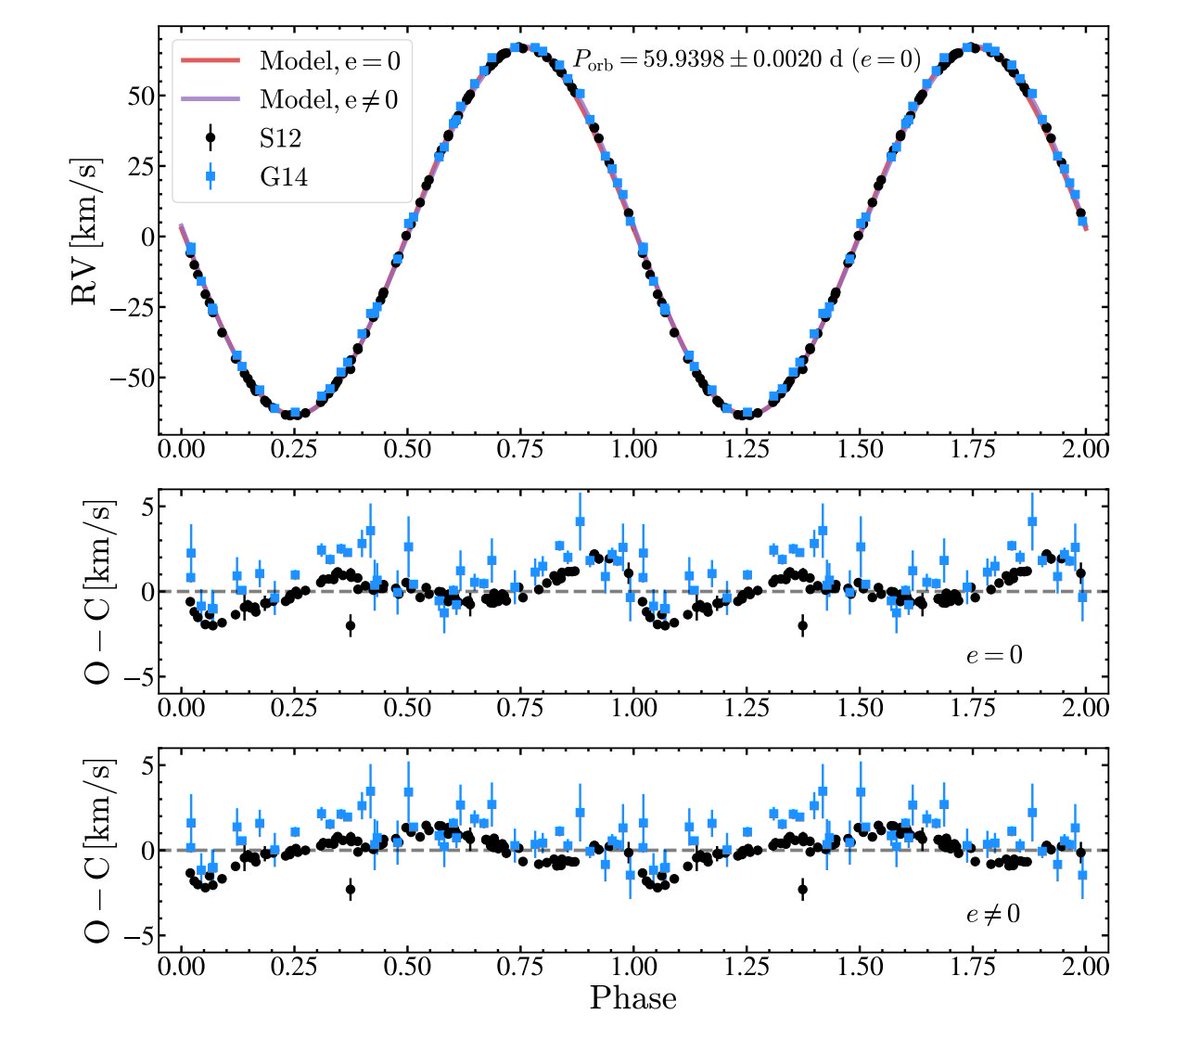 We re-derived the spectroscopic orbit for V723 Mon using archival SB9 + Strassmeier+2012 RV data. The spectroscopic orbit gives an orbital period of~60 days and is consistent with a circularized system. We note the presence of correlated RV residuals.